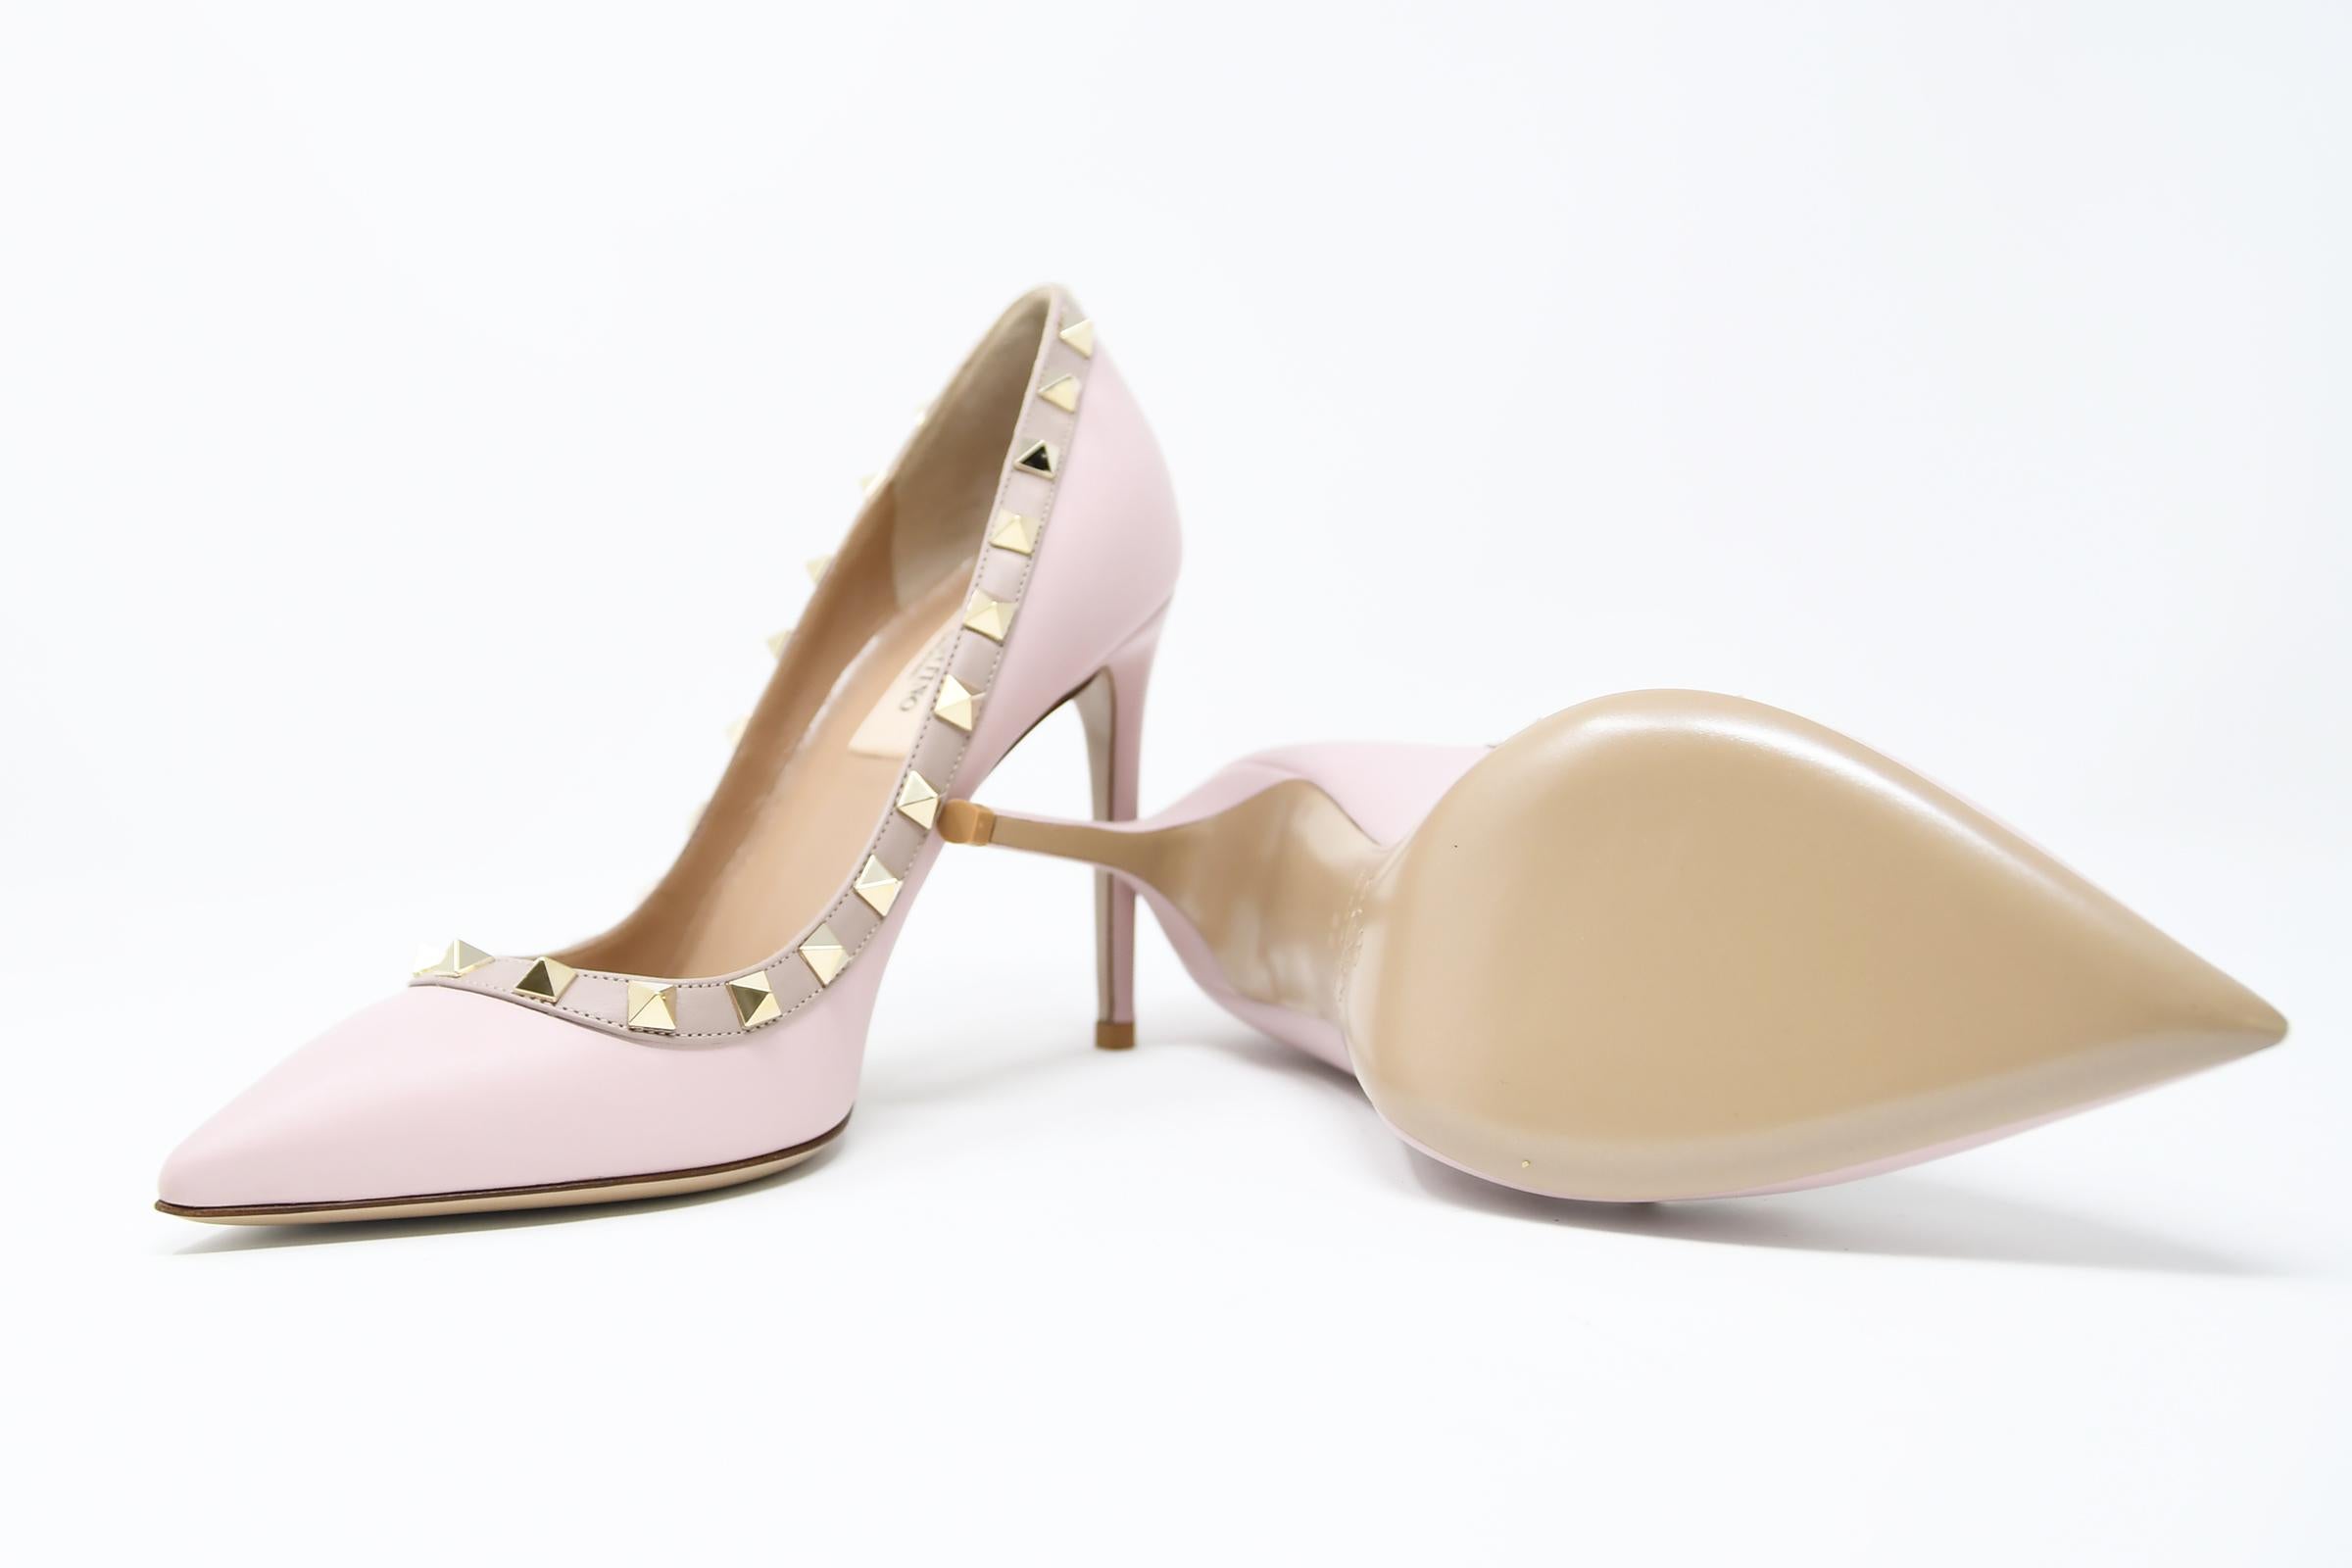 Classic Valentino stiletto in a light pink smooth calf leather with signature gold rock stud design.  Brand new and comes in original box with dust bag.